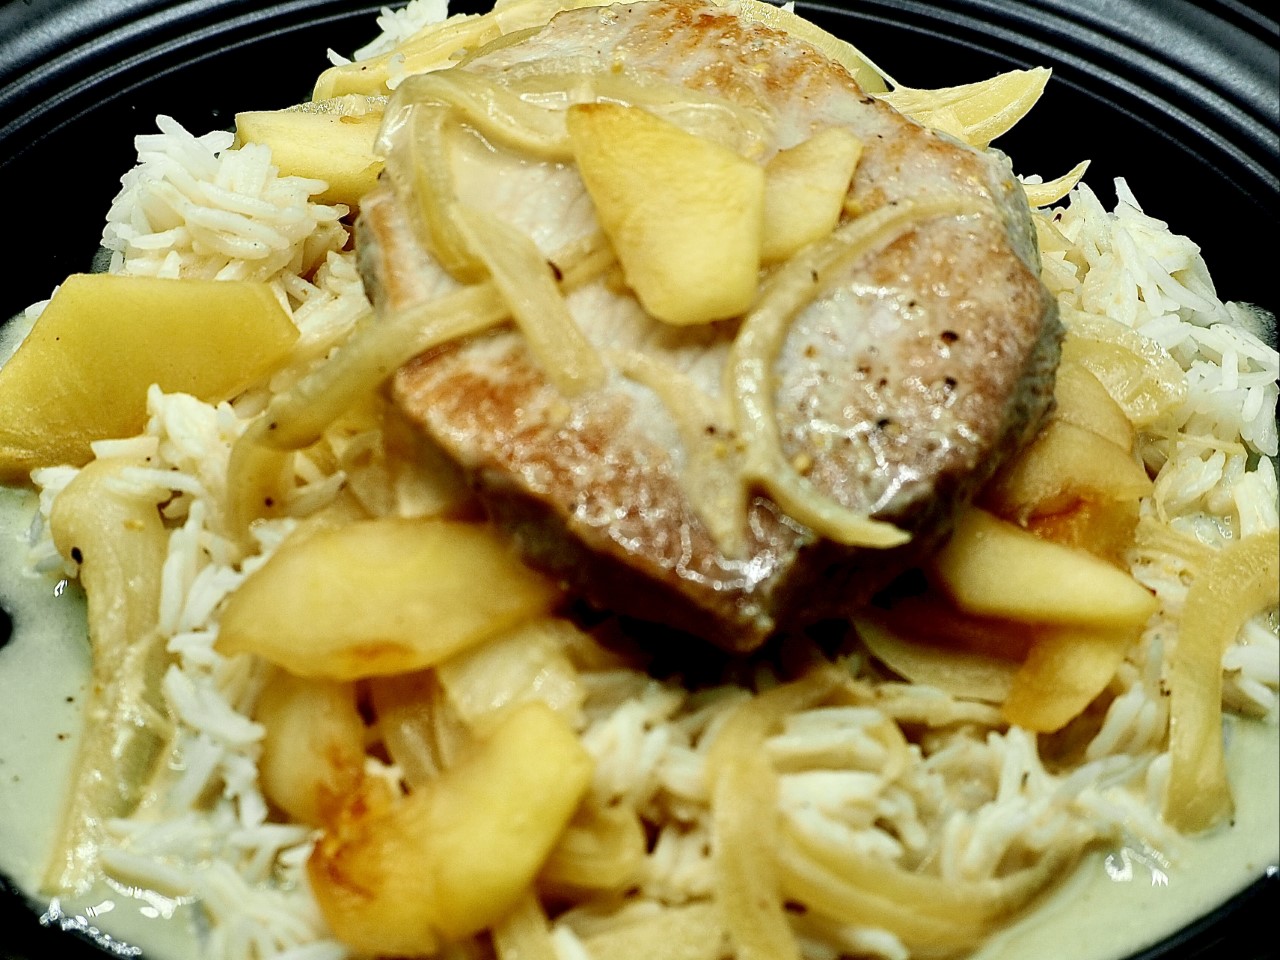 Porc aux Pommes et au Cidre – Pork Medaillons (or Chicken) with Onions, Apples, and Sparkling Apple Cider Cream Sauce